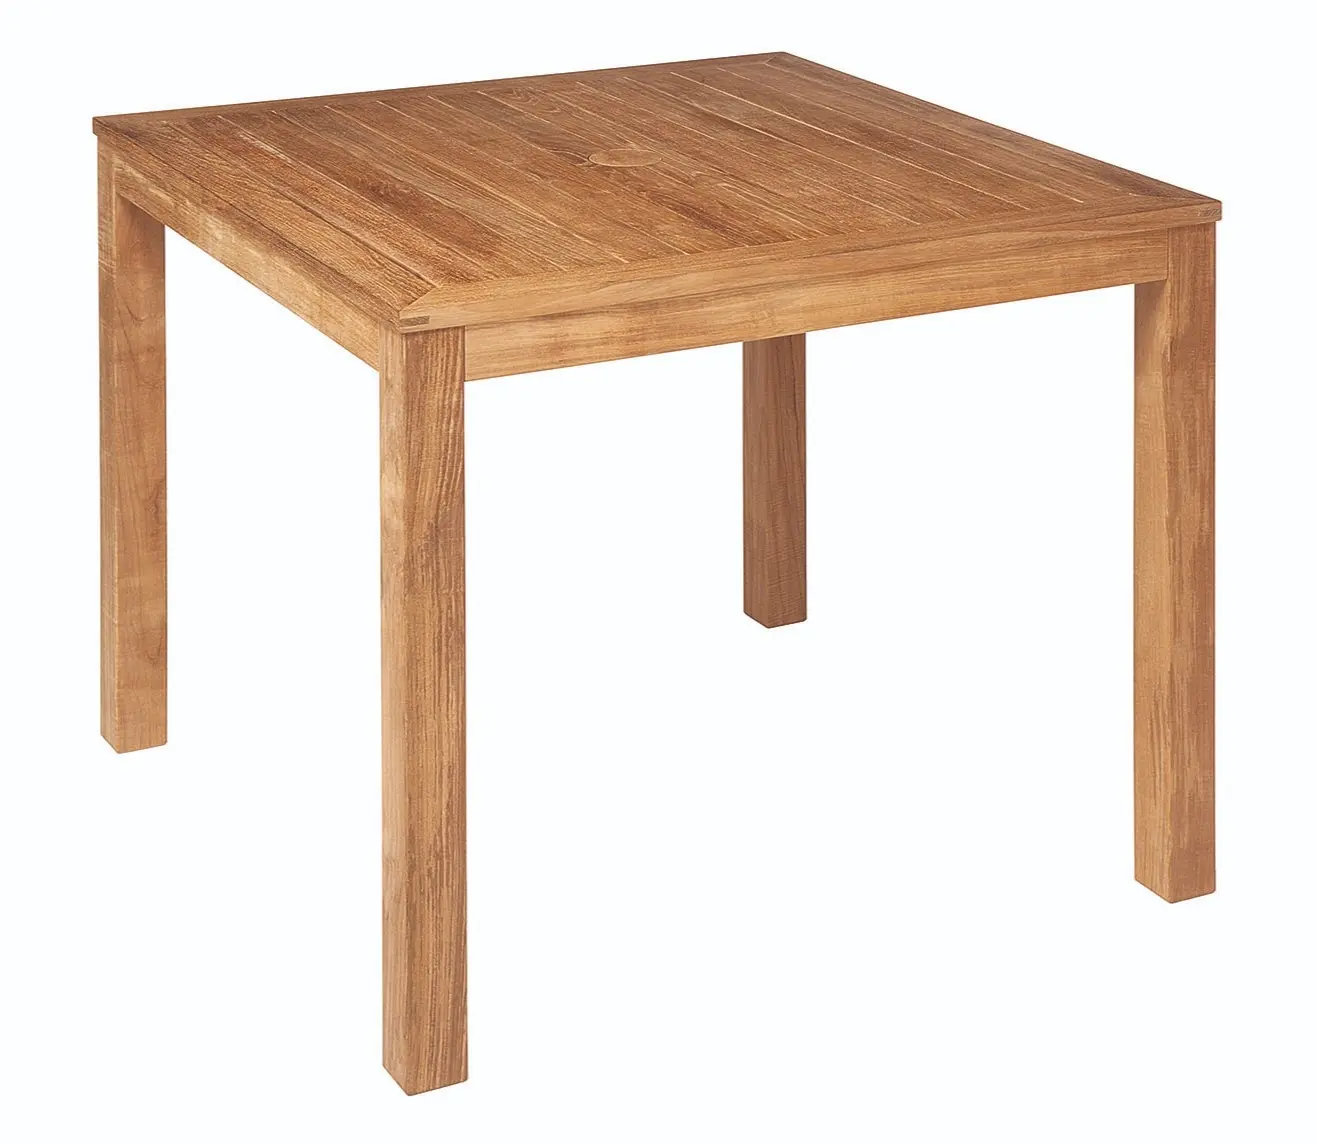 Barlow Tyrie Linear 90cm Dining Table